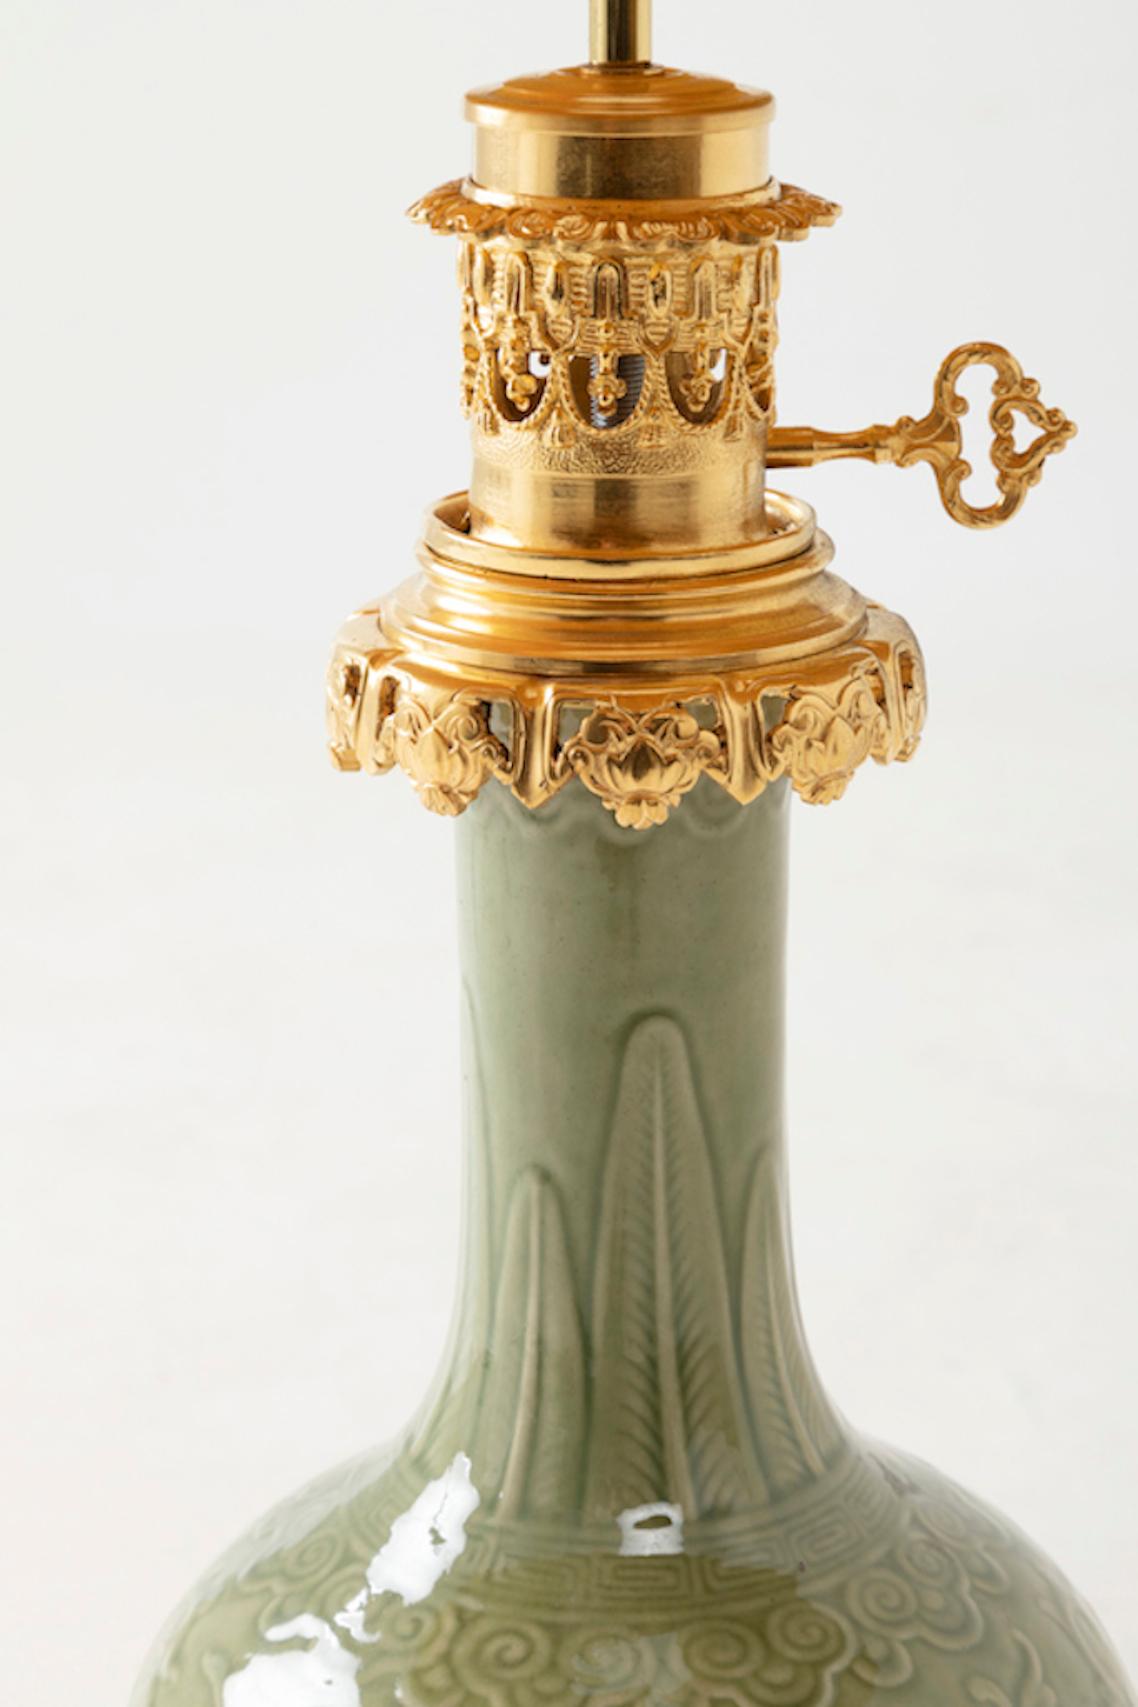 Chinoiserie Celadon Porcelain Lamp with a Relief Decor and Gilt Bronze Mount, circa 1880